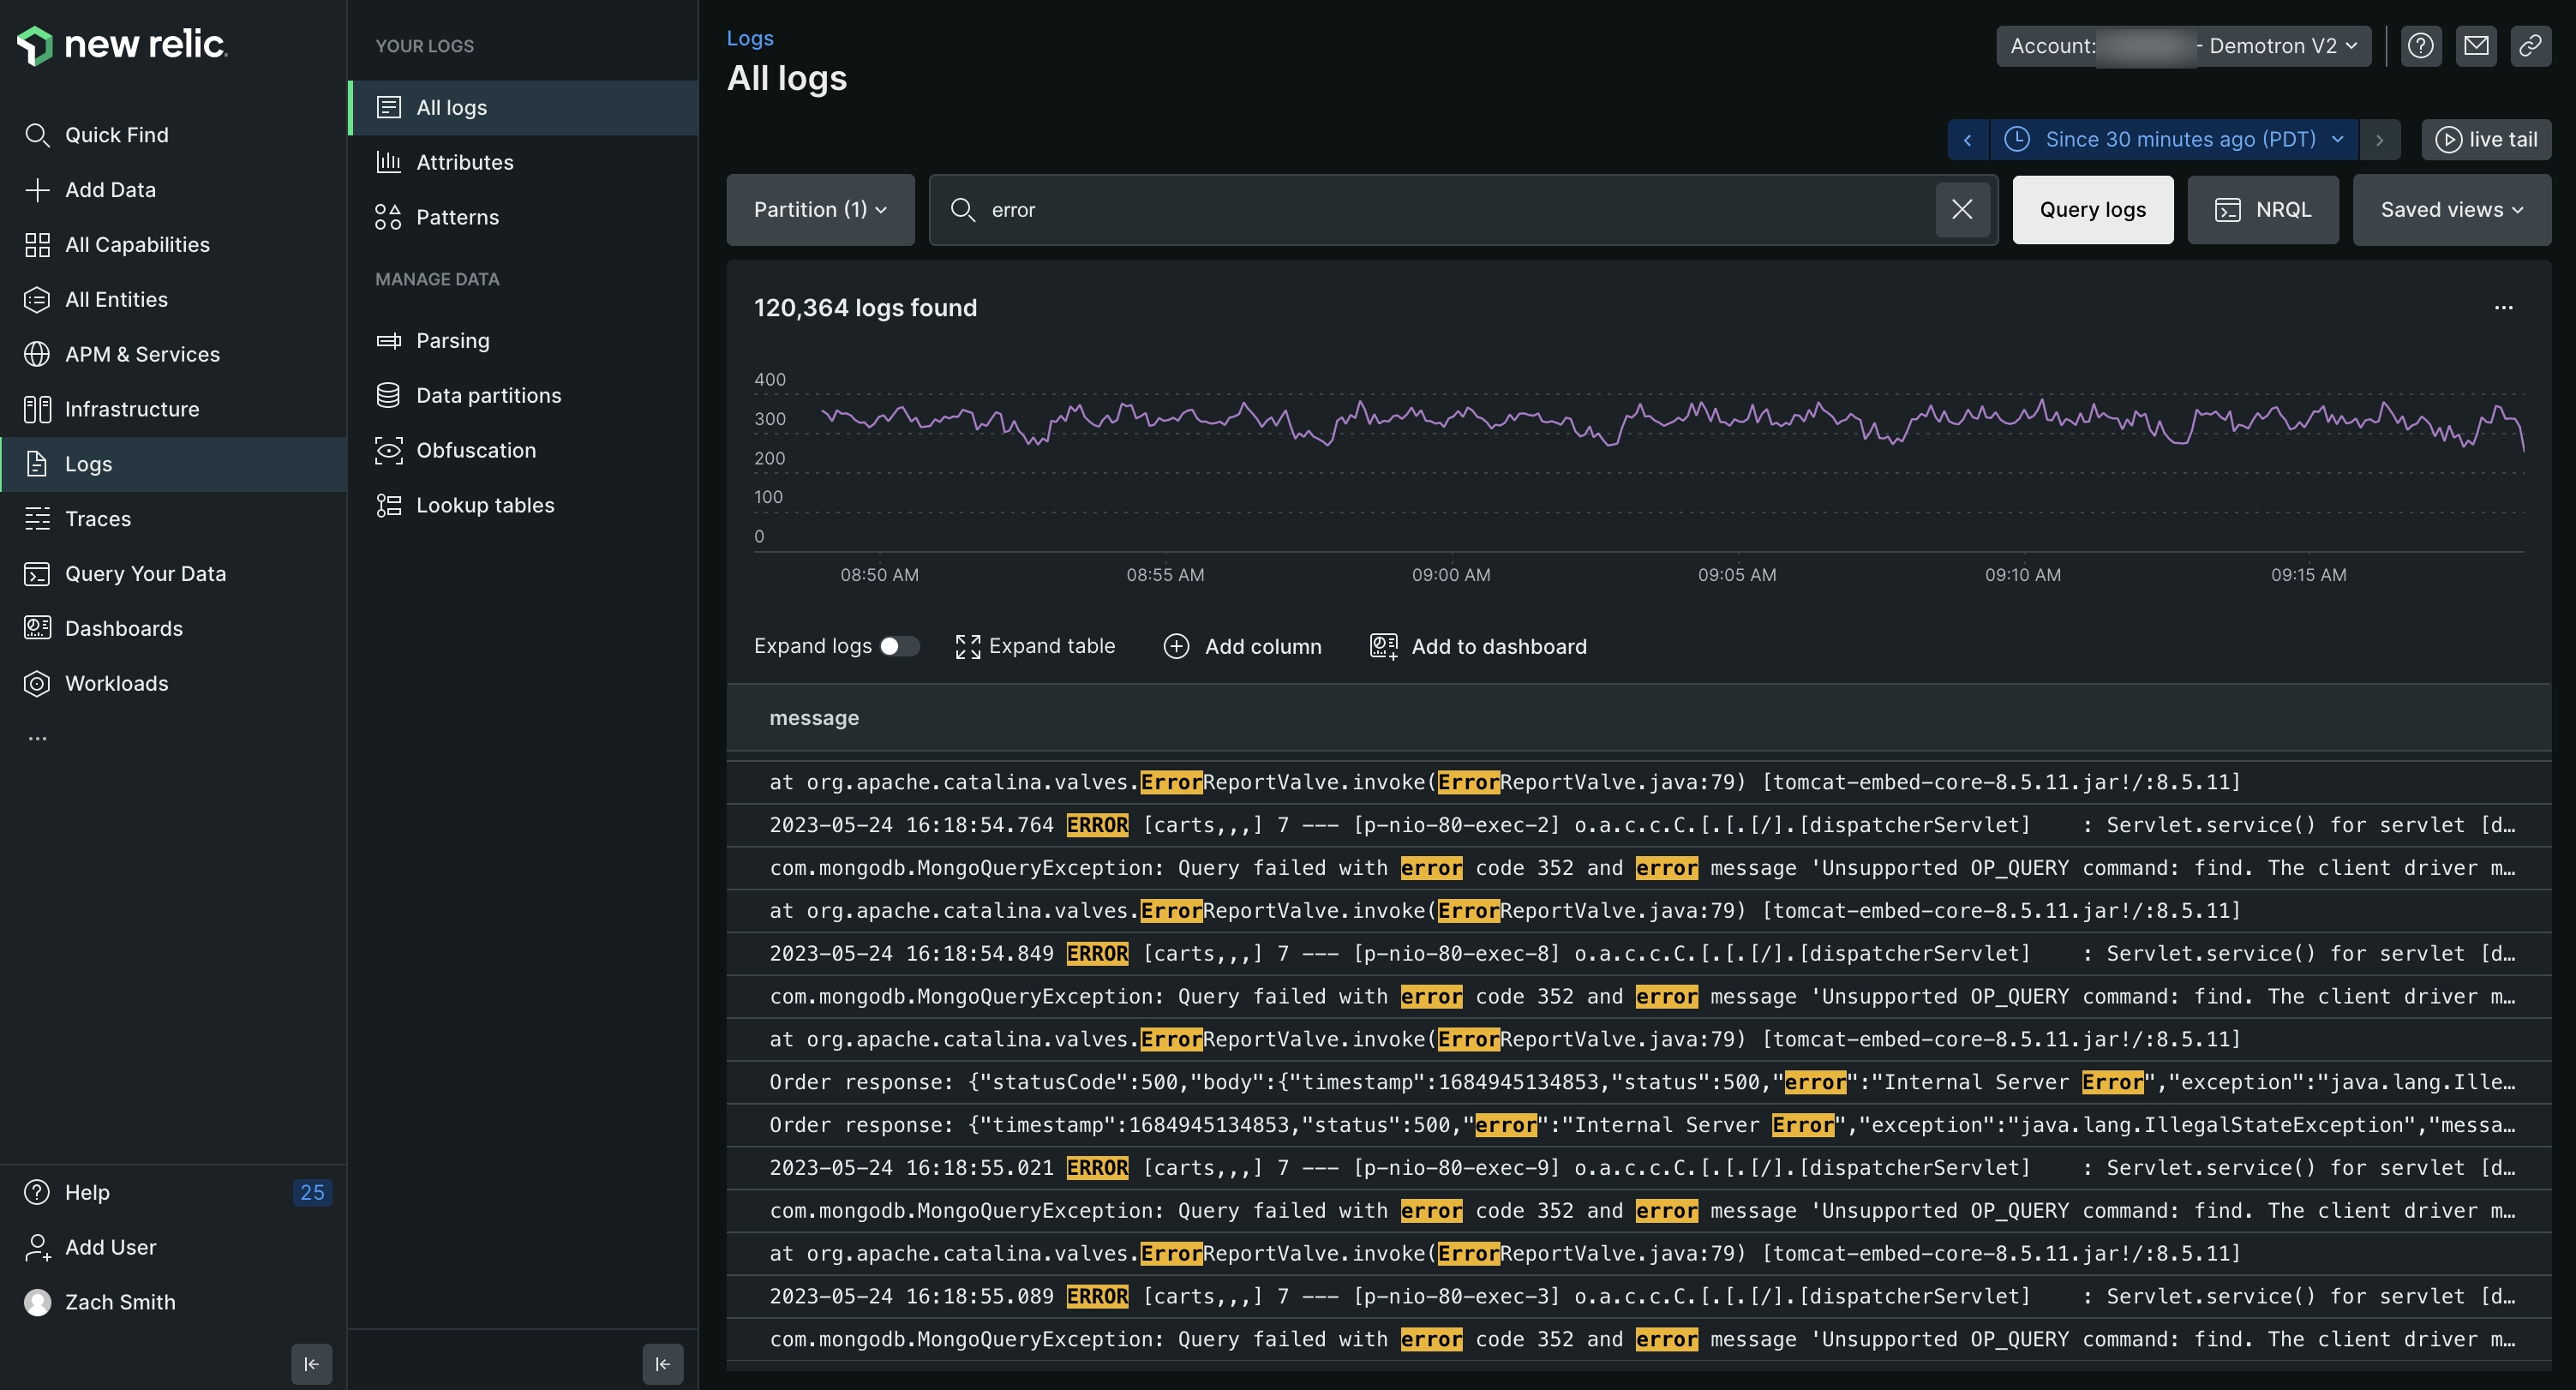 Log Monitoring in New Relic